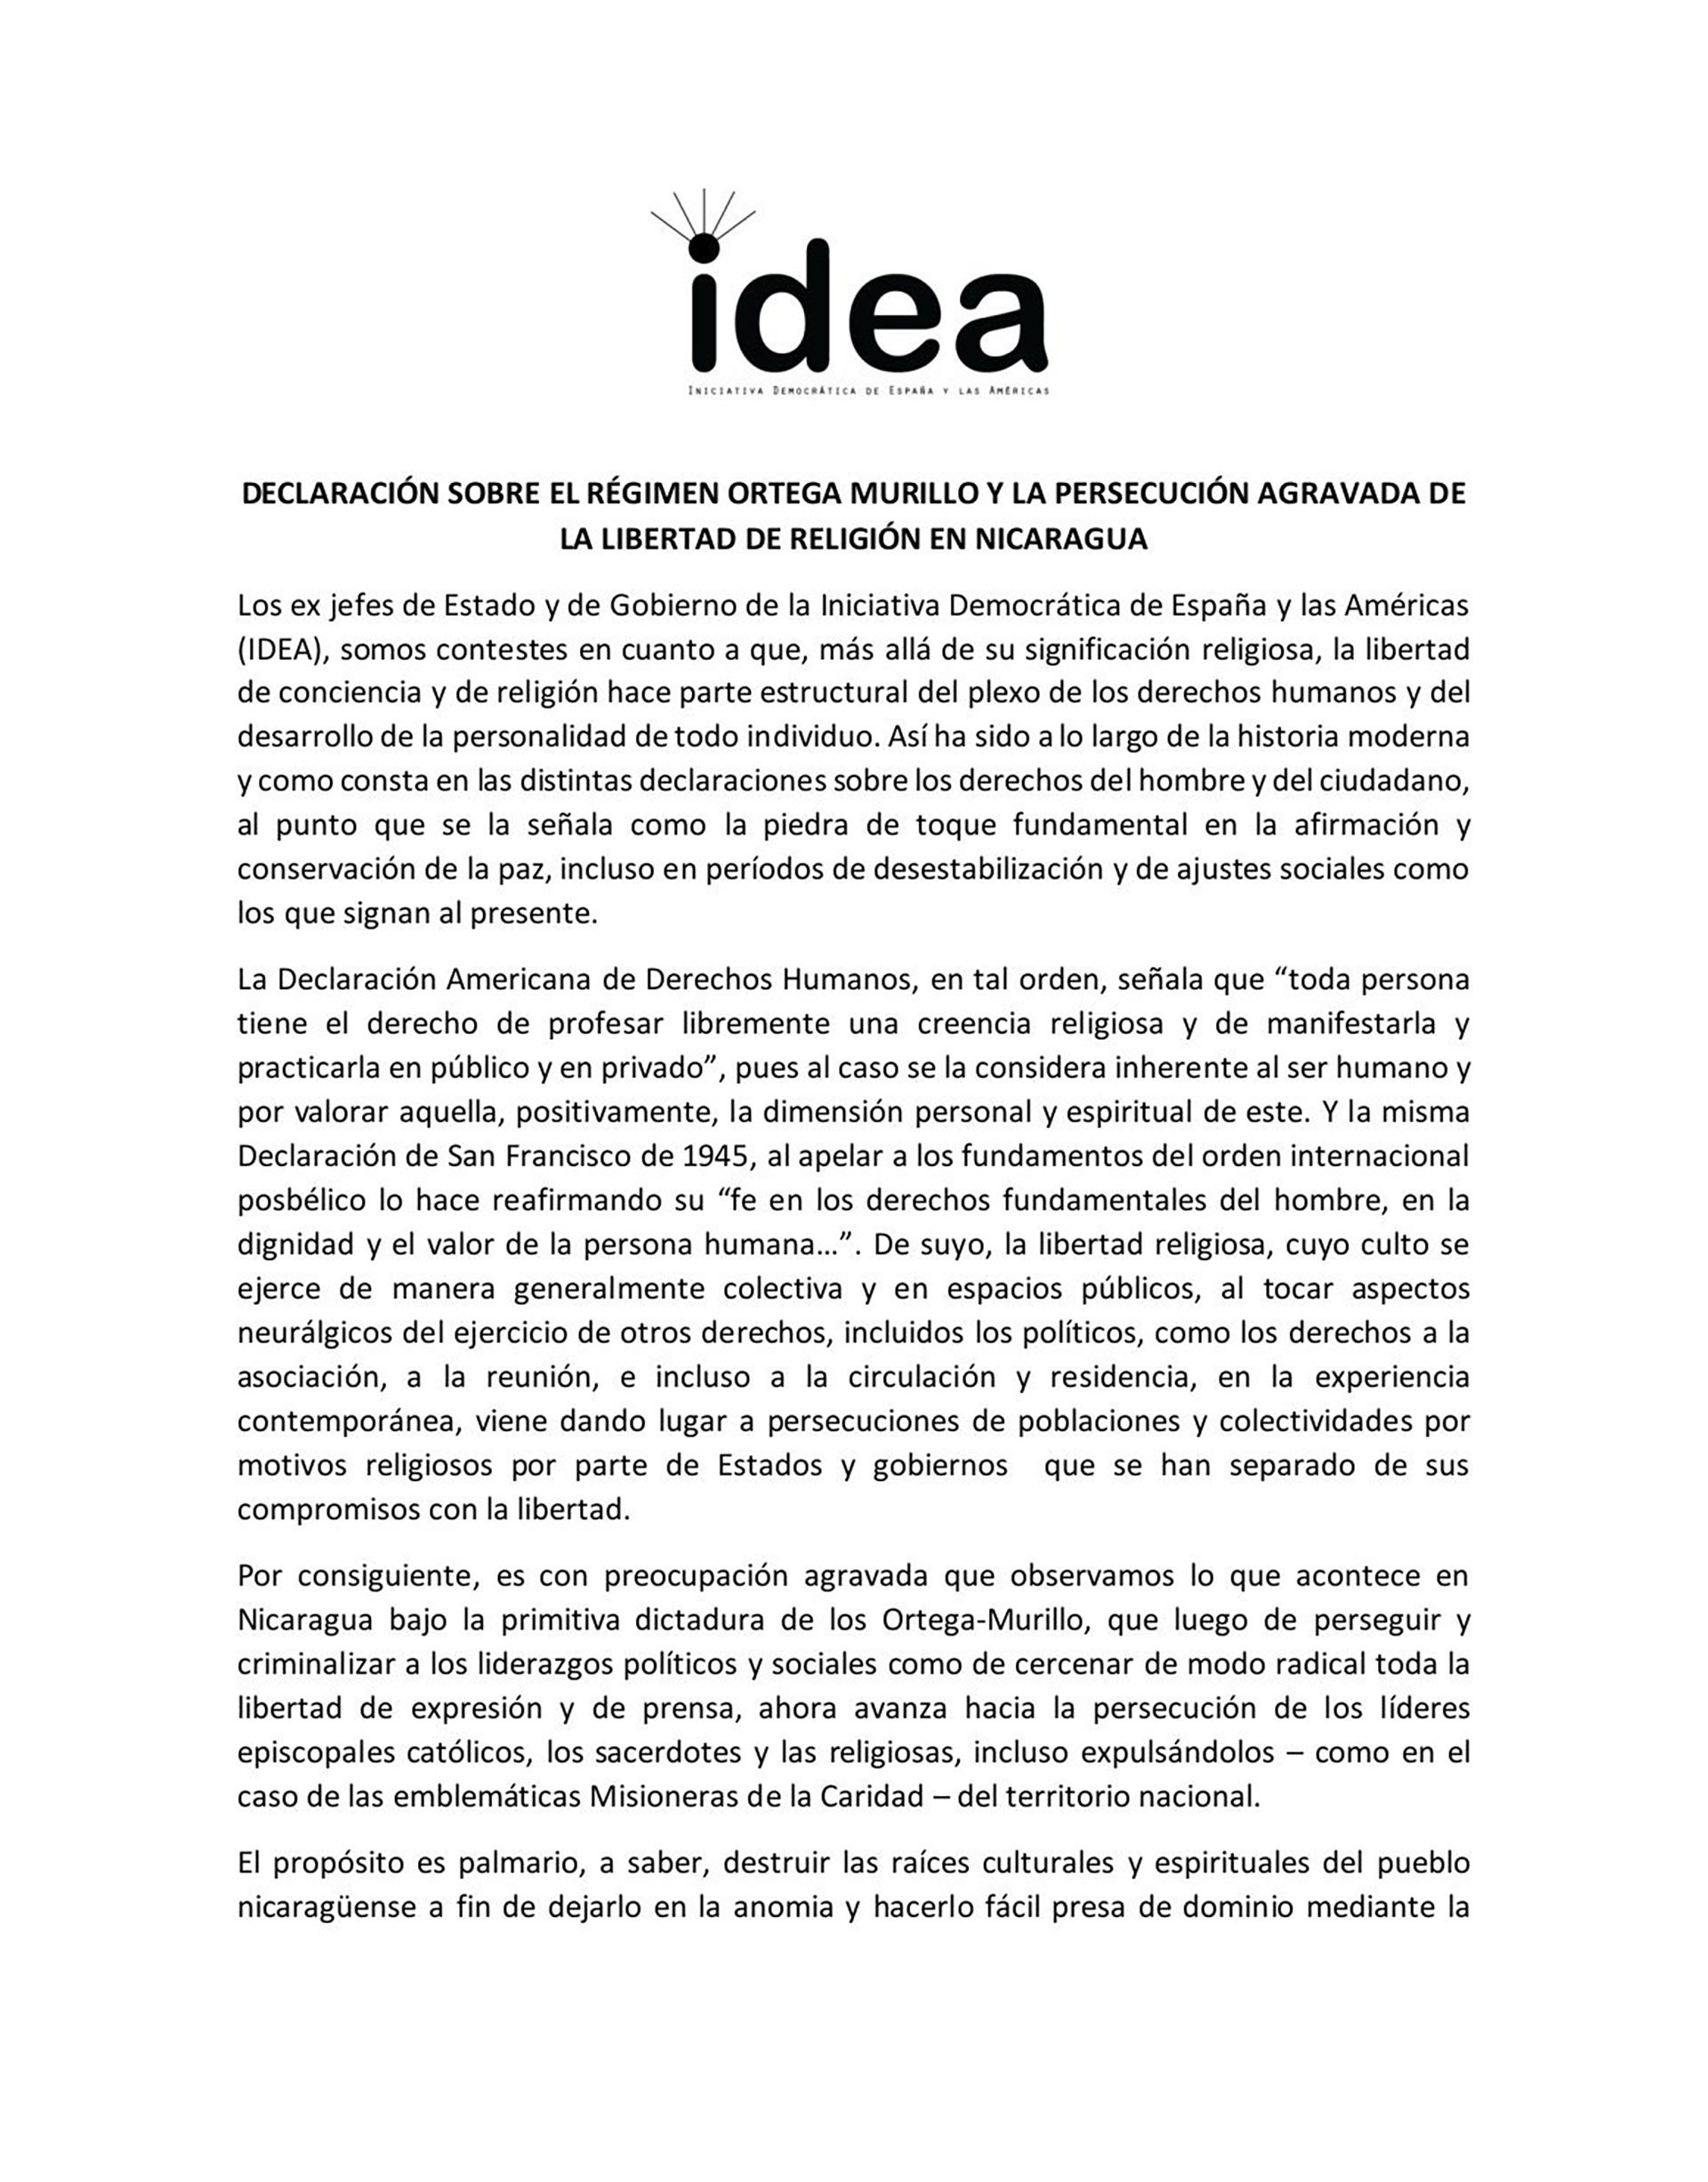 Part 1 of the Idea Group's statement on religious persecution in Nicaragua 